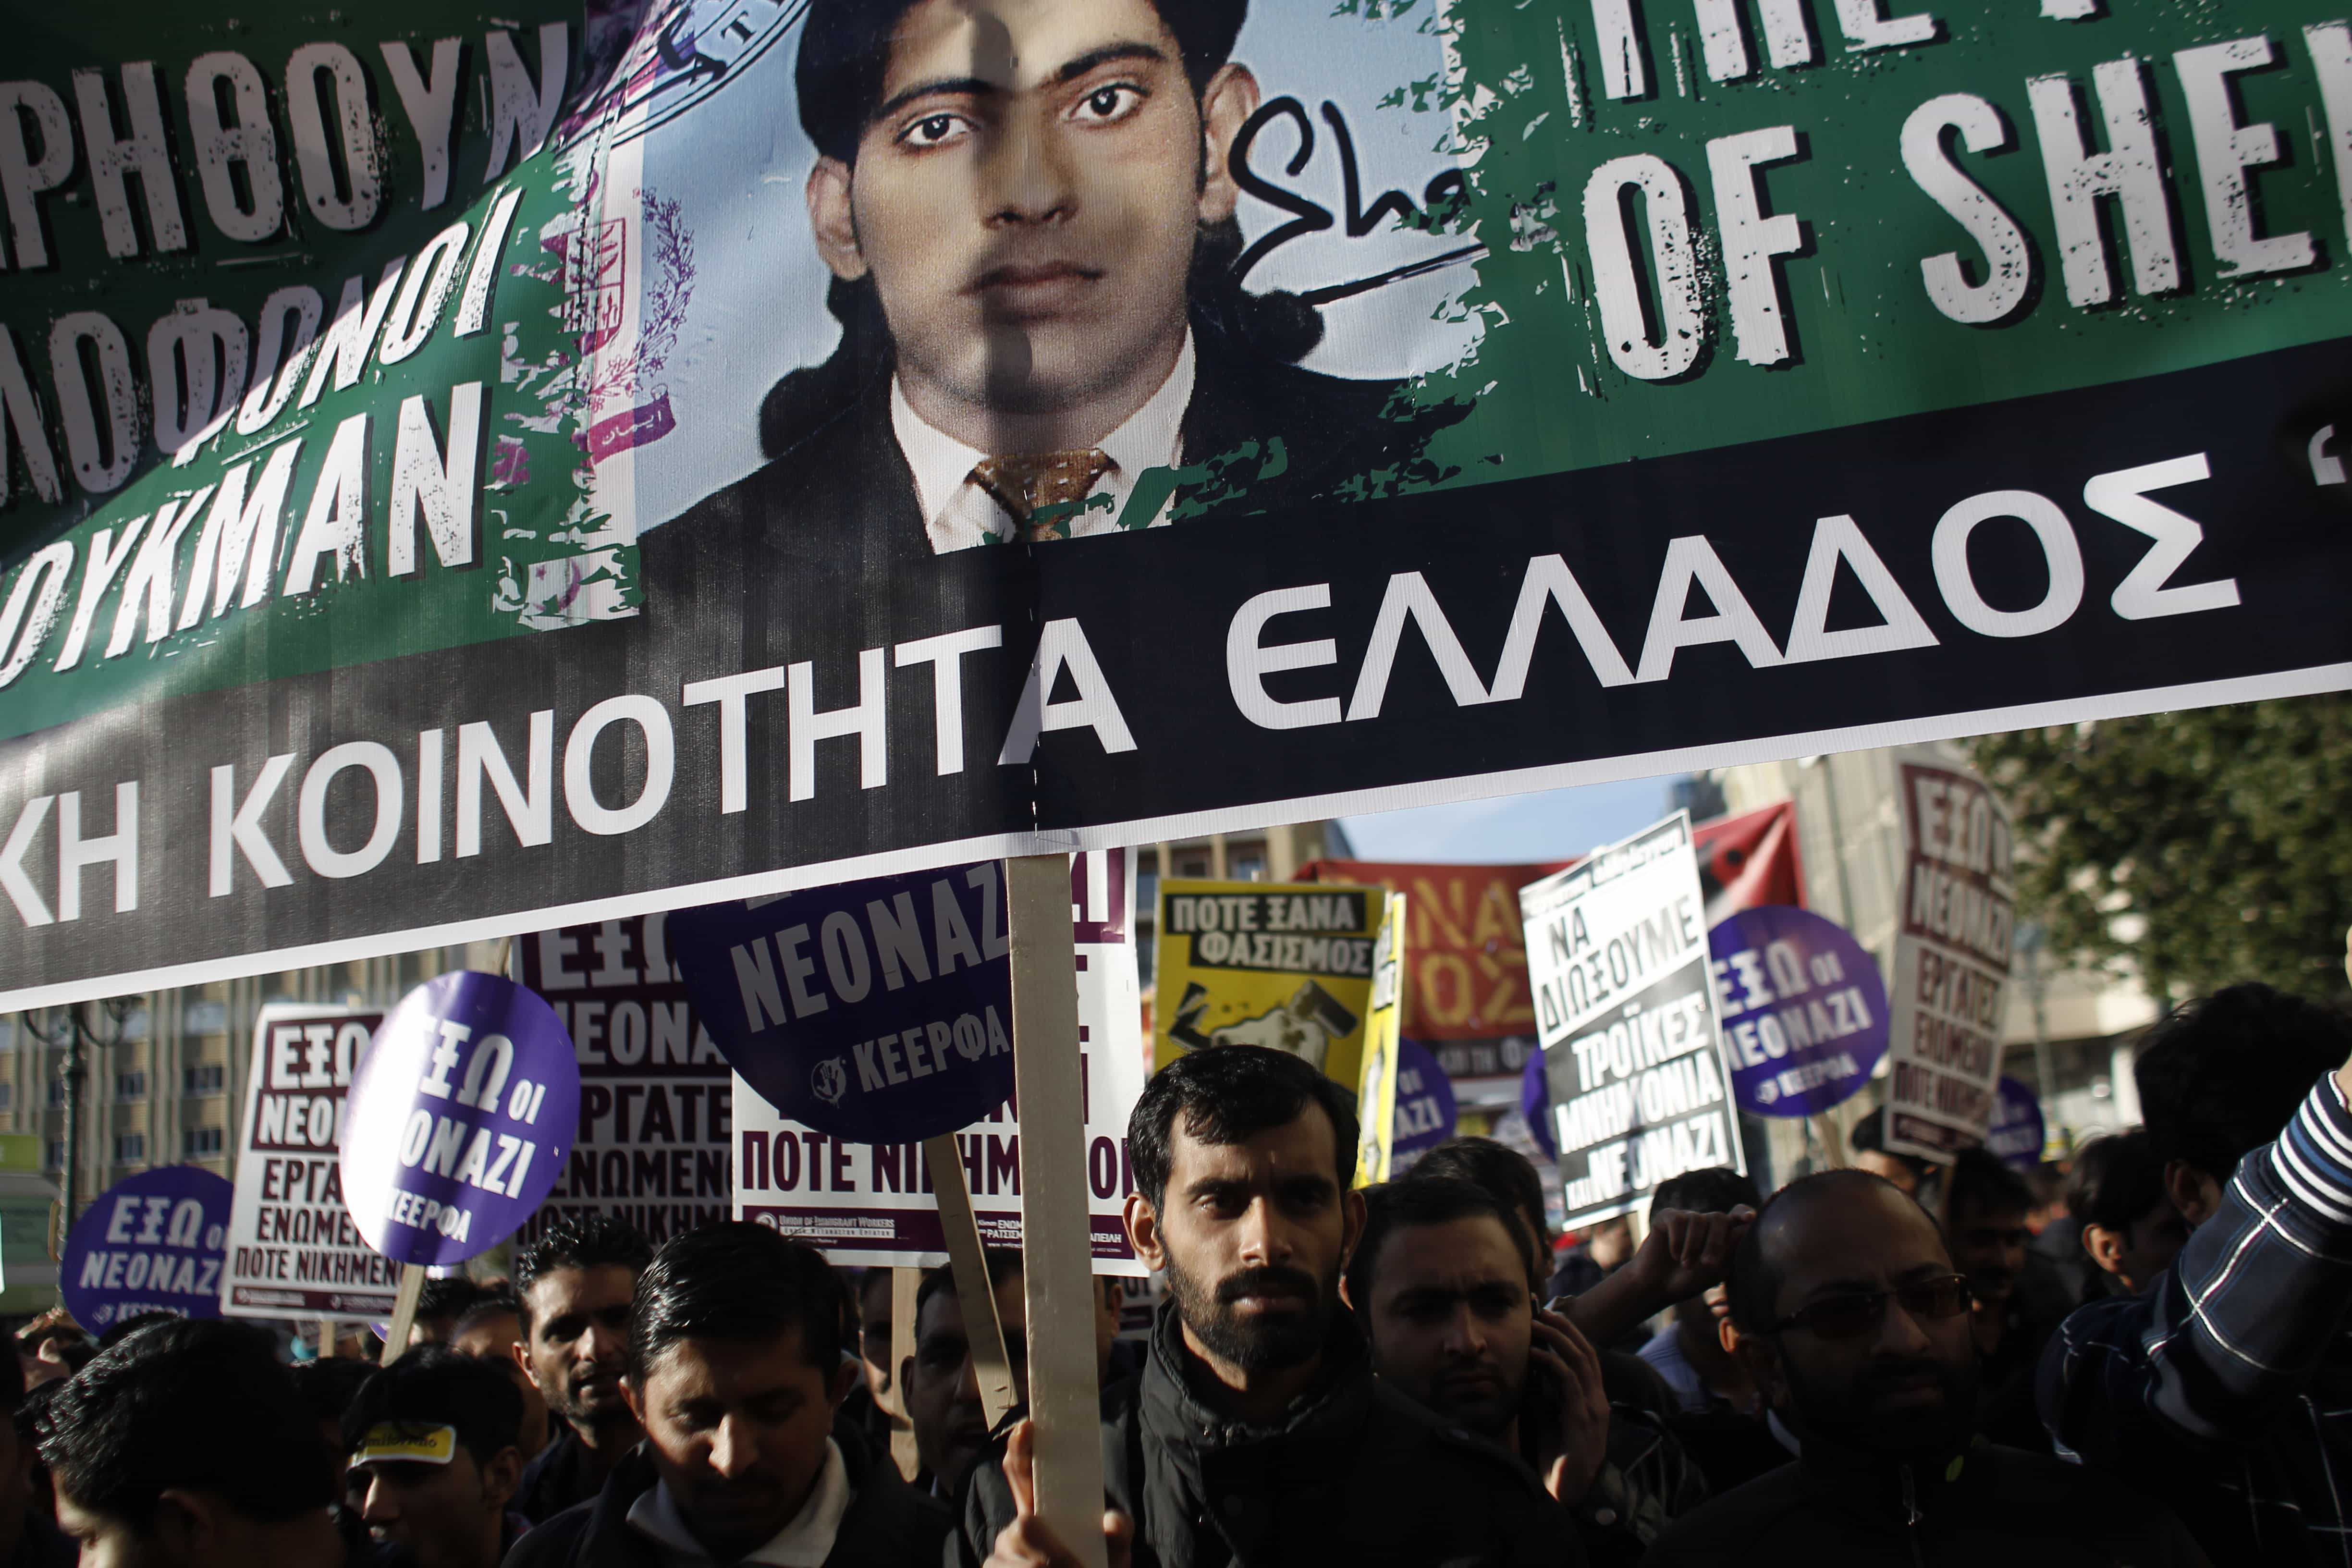 Mourners protest against the murder of Shehzad Luqman, a Pakistani immigrant who was killed by suspected extreme rightists, in Athens, 19 January 2013., AP Photo/Kostas Tsironis